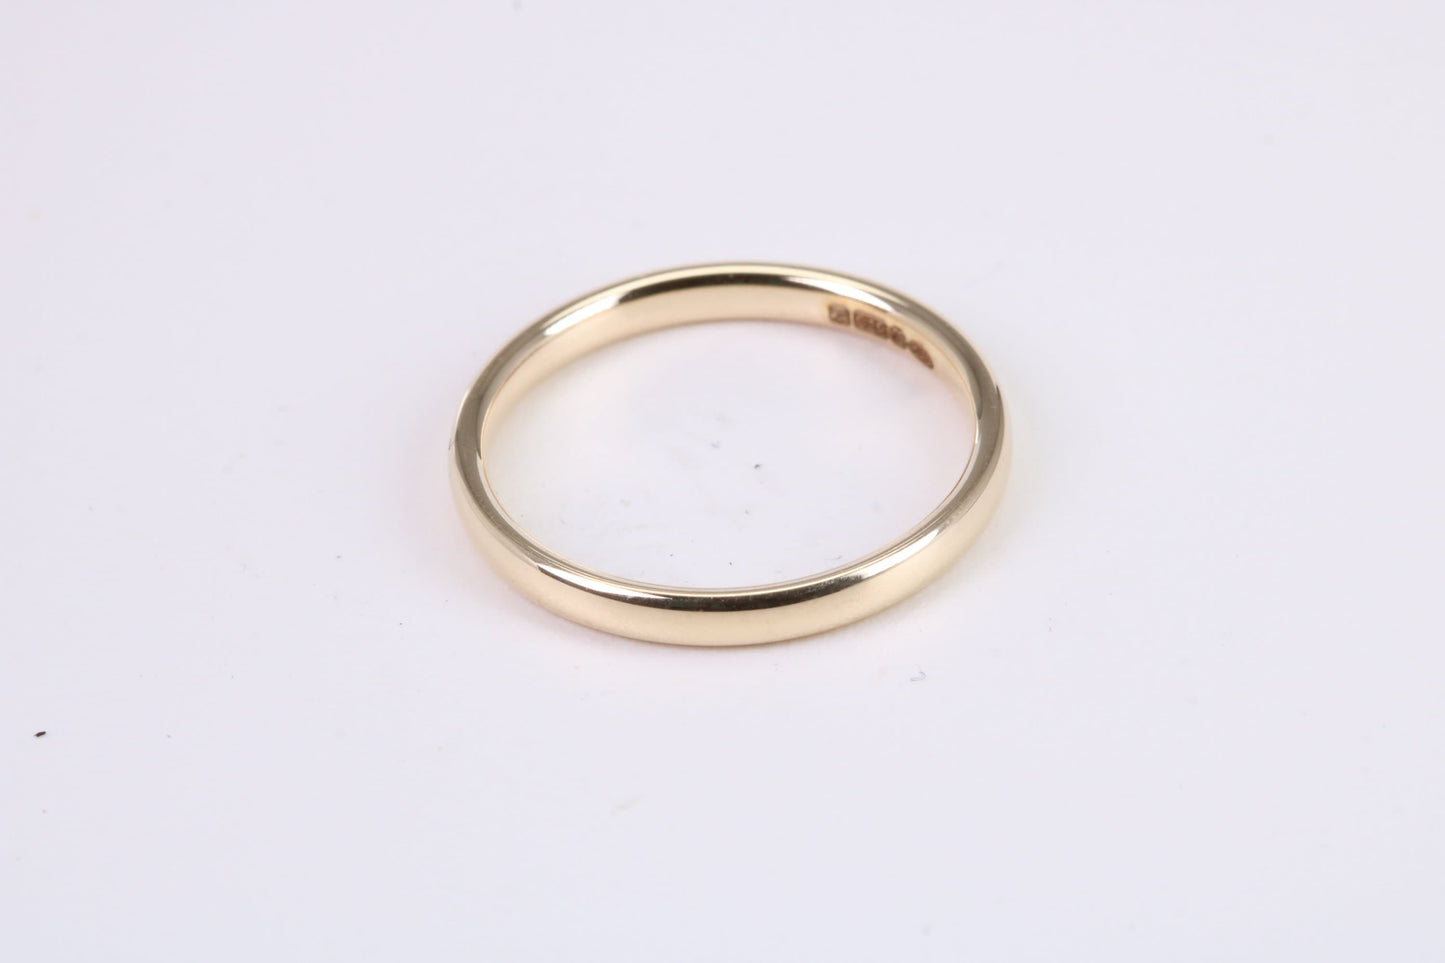 2 mm Wide Simple Comfort Court Profile Wedding Band, Made from Solid Yellow Gold, British Hallmarked